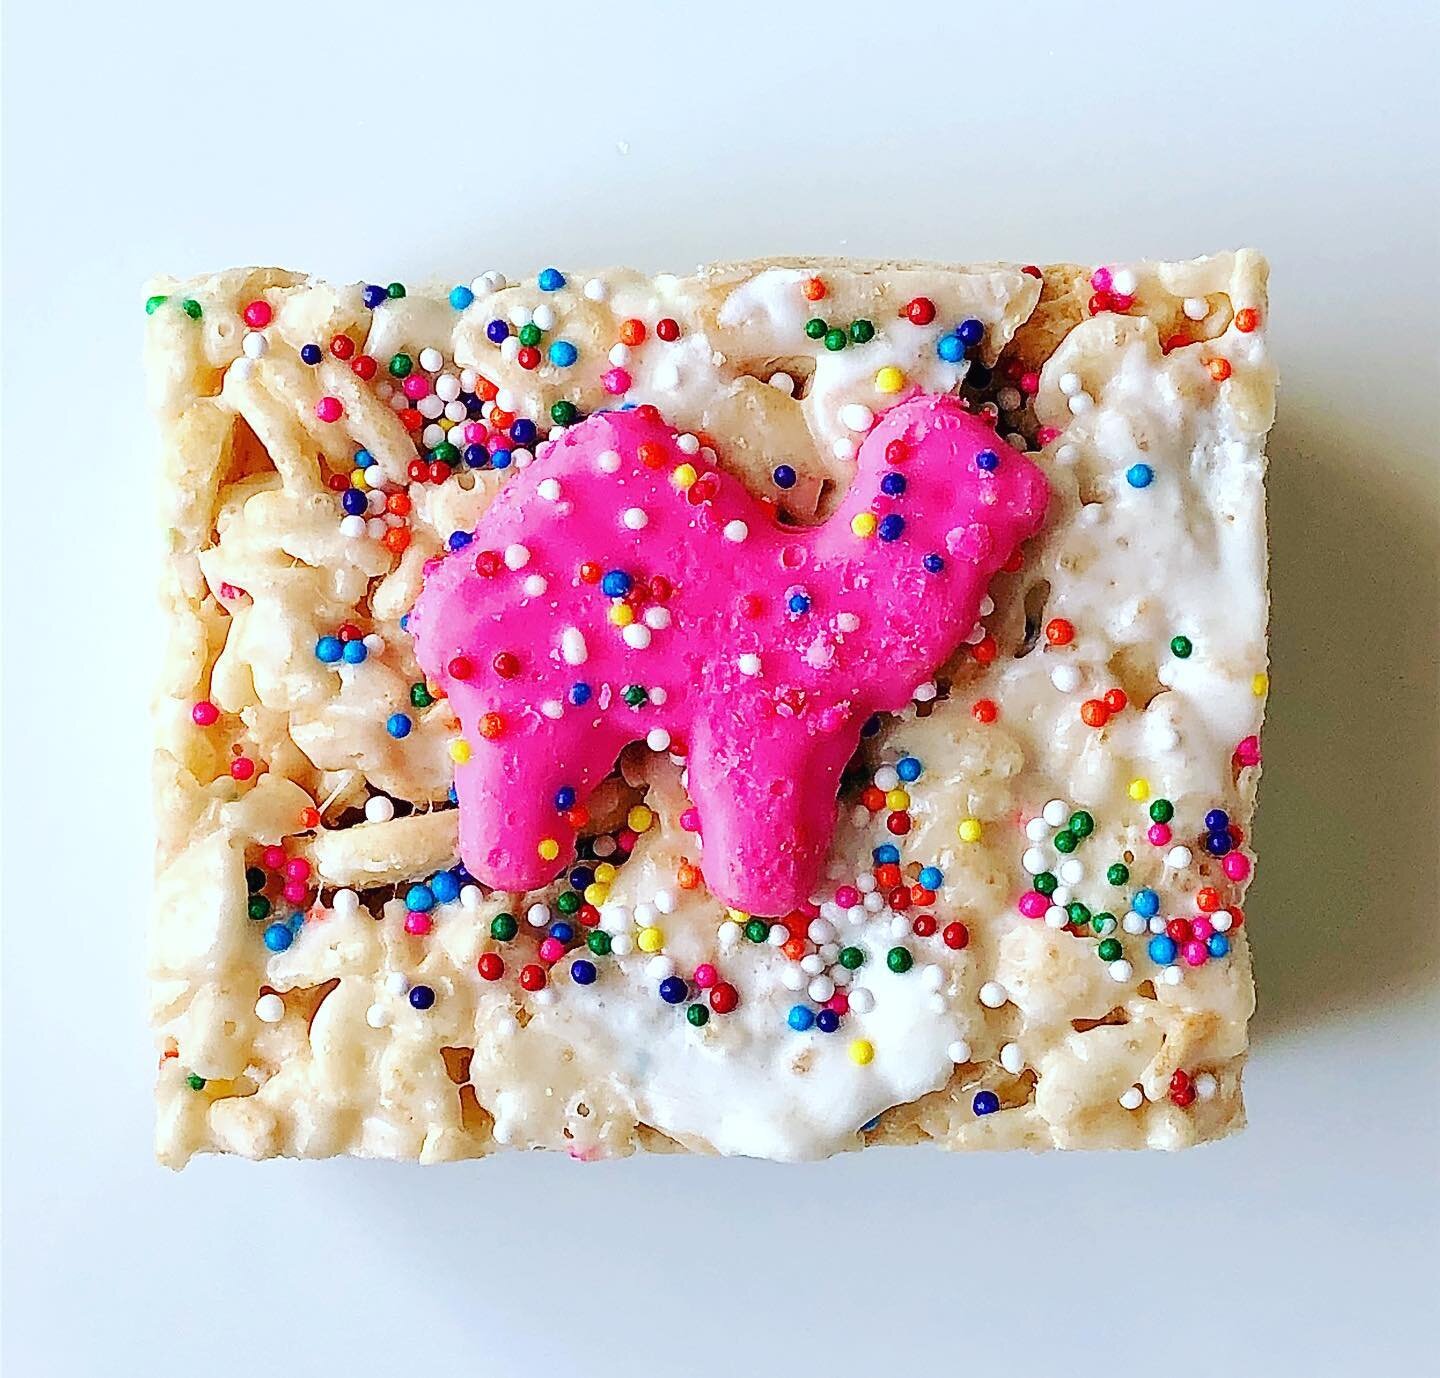 &ldquo;LIFE&rsquo;S A CIRCUS&rdquo; ANIMAL COOKIE RICE CRISPIE TREATS are back on the menu for May!  A fan favorite from past years!

-vanilla flavored rice crispie treat base 
-3 flavors of animal cookies 
-extra marshmallows 
-rainbow sprinkles
-to